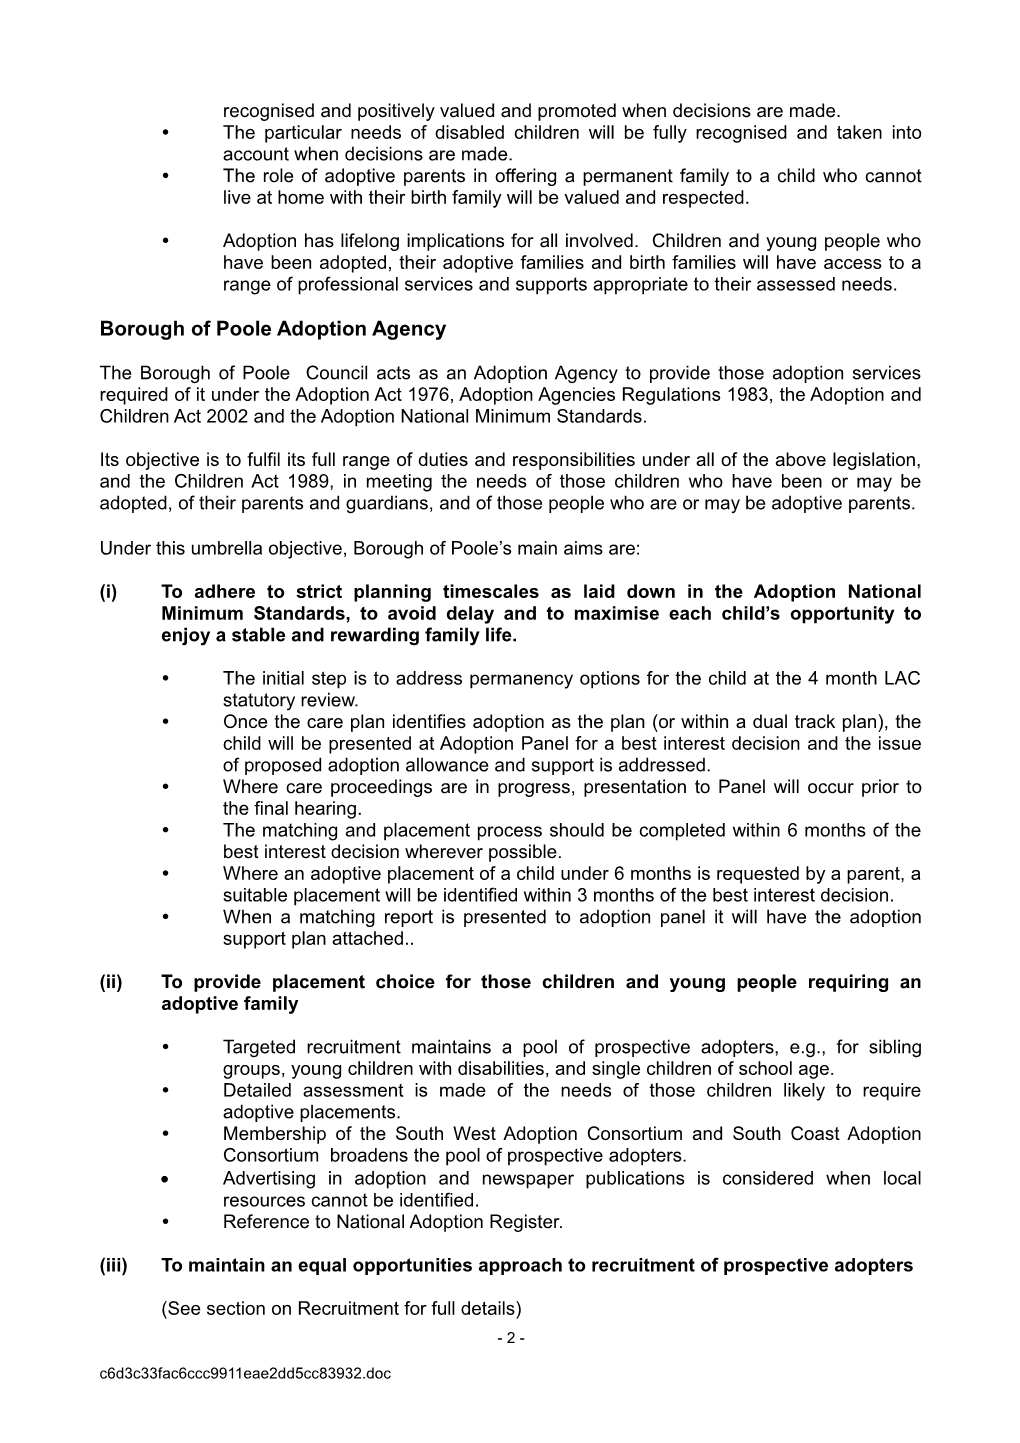 Appendix 1 to Annual Report from Poole's Adoption Panel for 2002/3